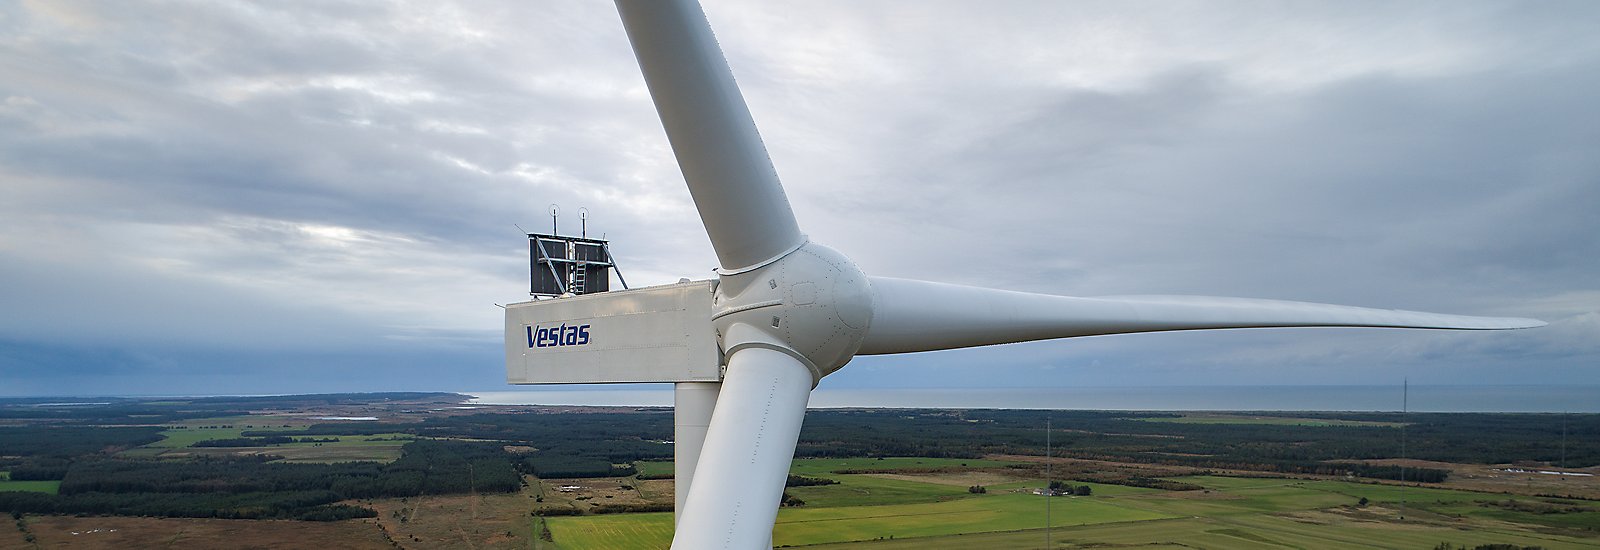 Vestas Wins 144 MW Wind Farm Contract in South Africa | Renewable Energy Boost